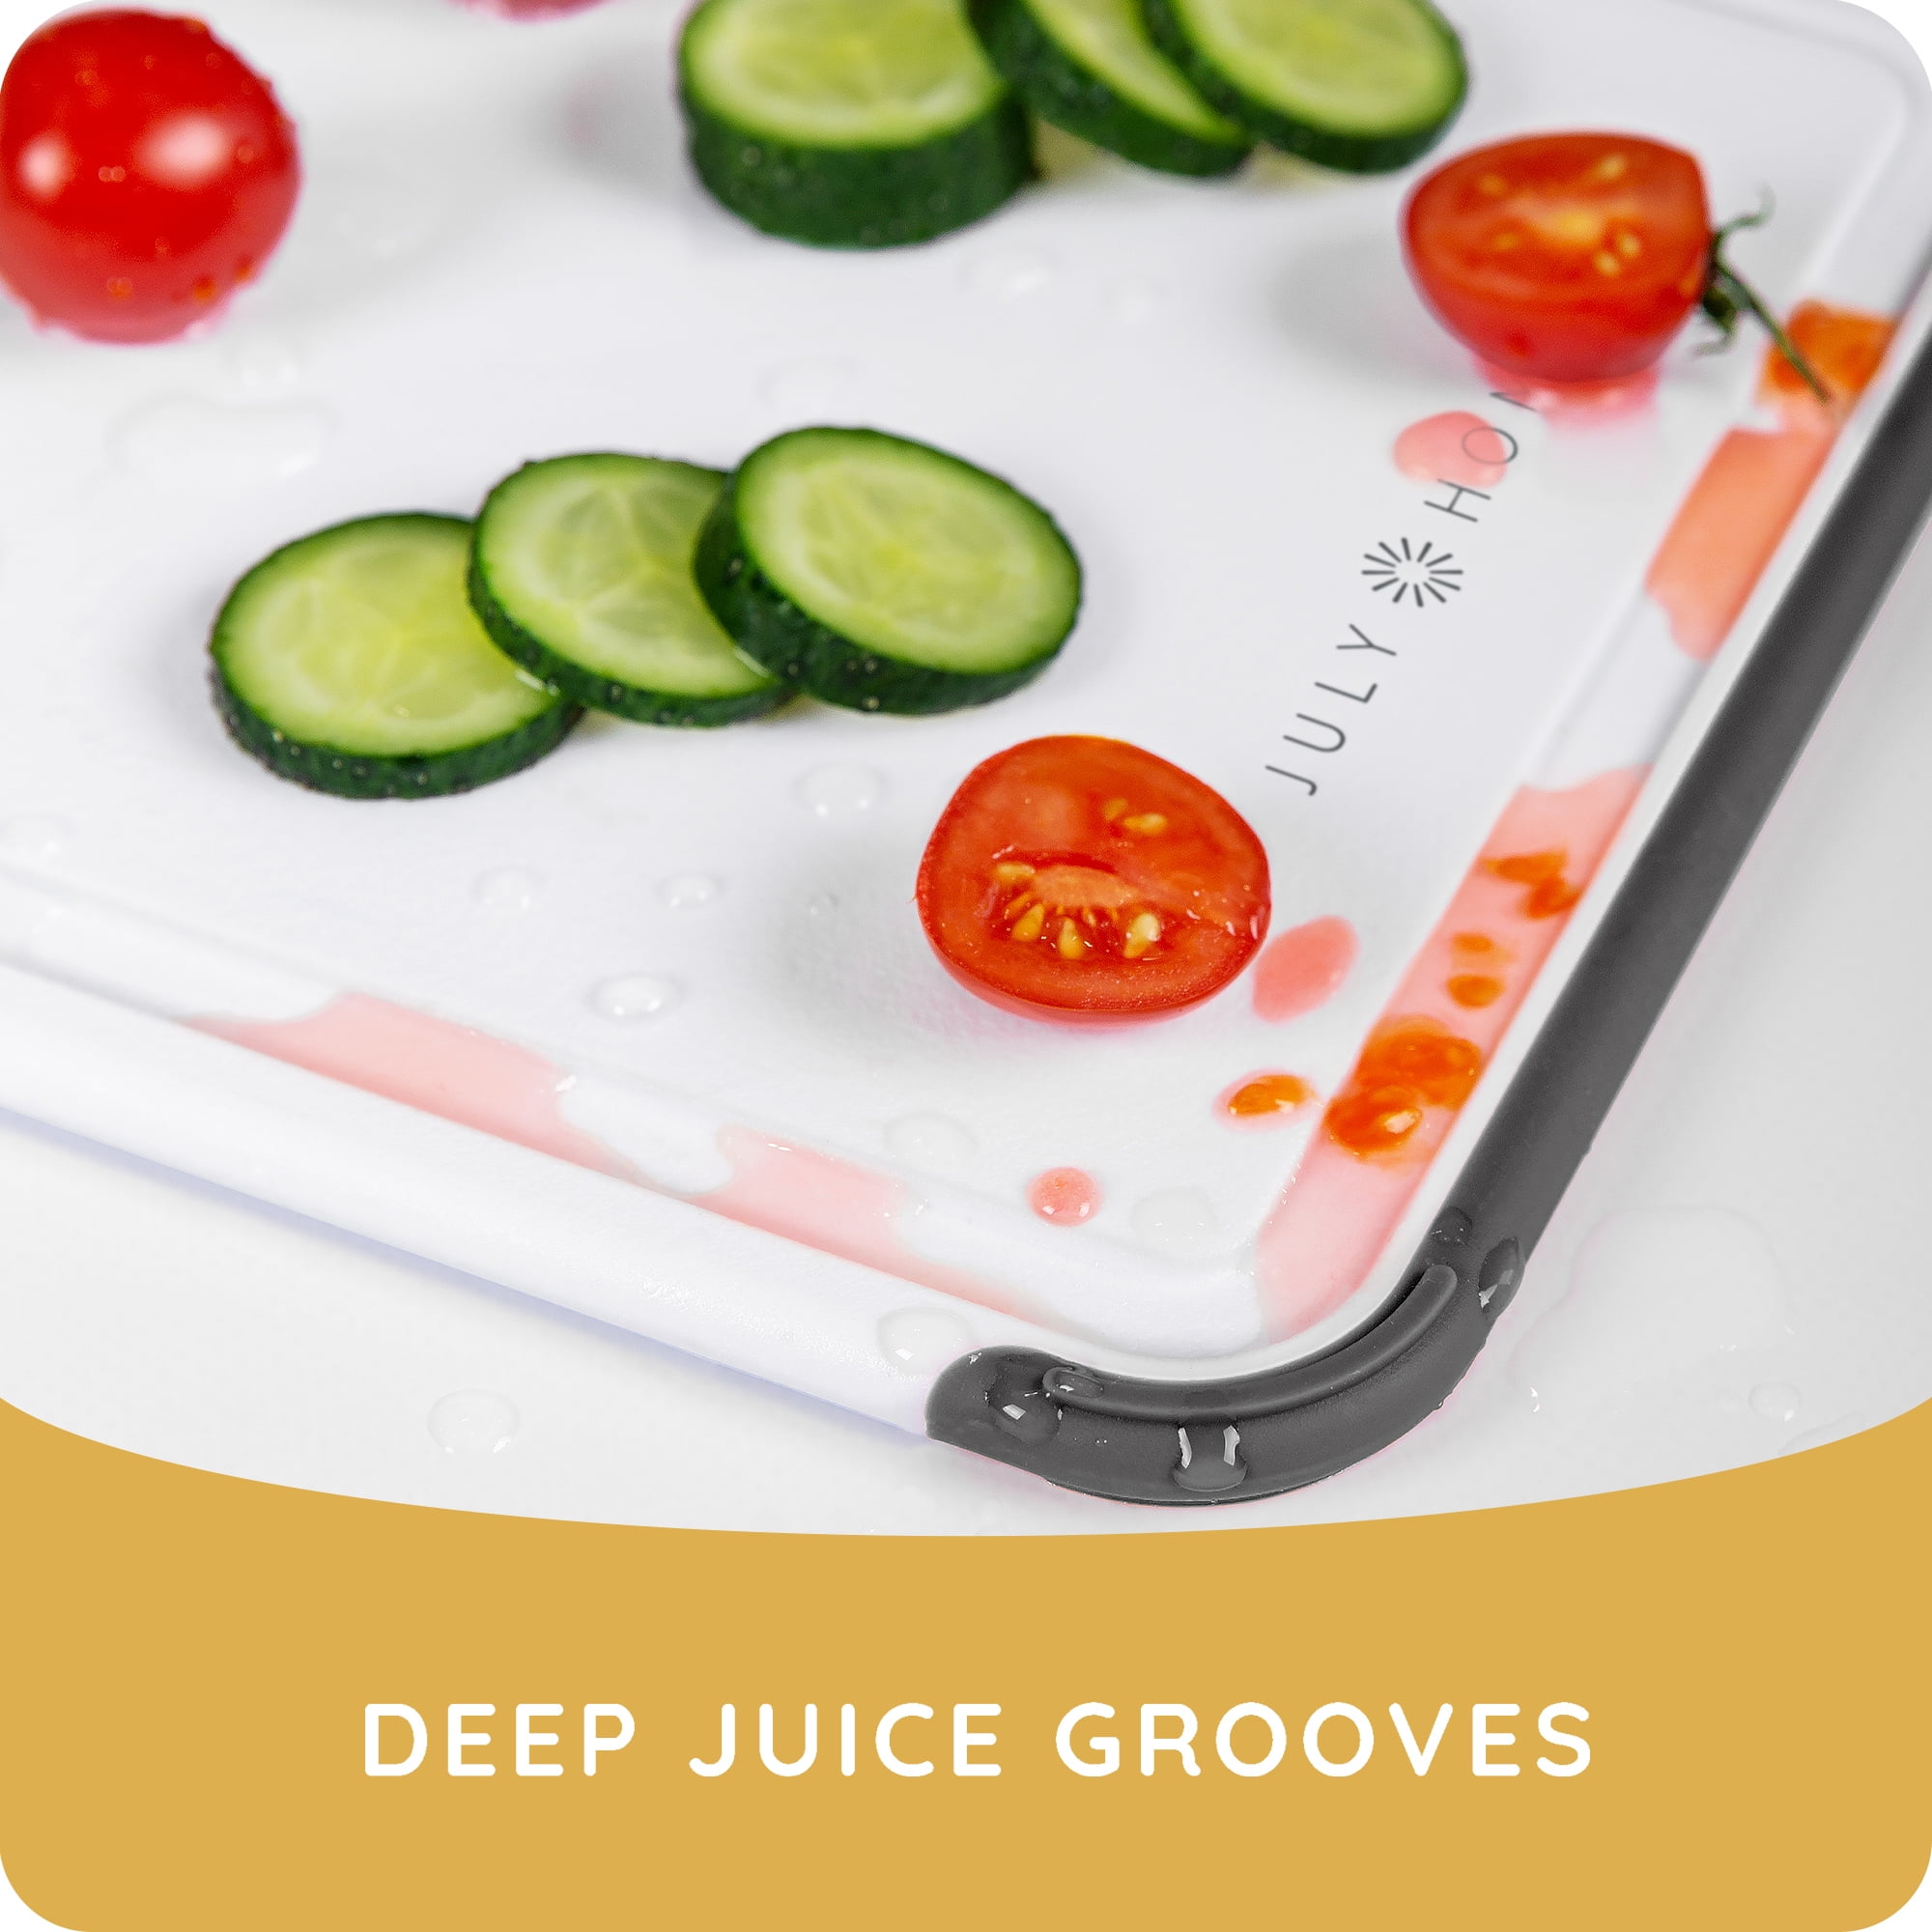 Cutting Boards for Kitchen, Plastic Chopping Board Set of 4 with Non-Slip Feet and Deep Drip Juice Groove, Easy Grip Handle, BPA Free, Non-Porous, Dis